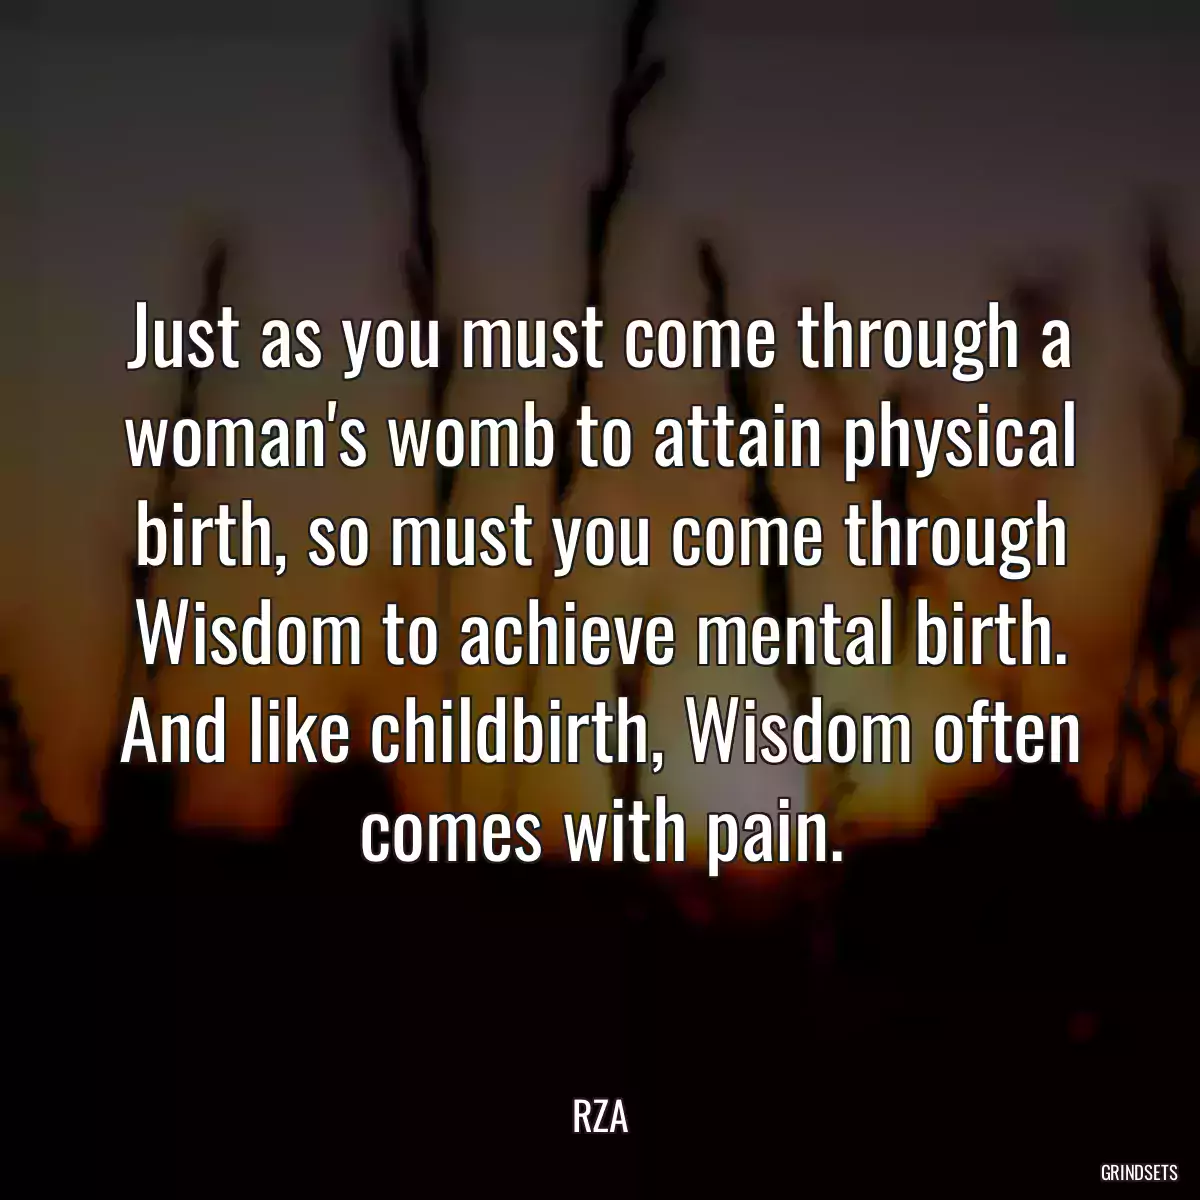 Just as you must come through a woman\'s womb to attain physical birth, so must you come through Wisdom to achieve mental birth. And like childbirth, Wisdom often comes with pain.